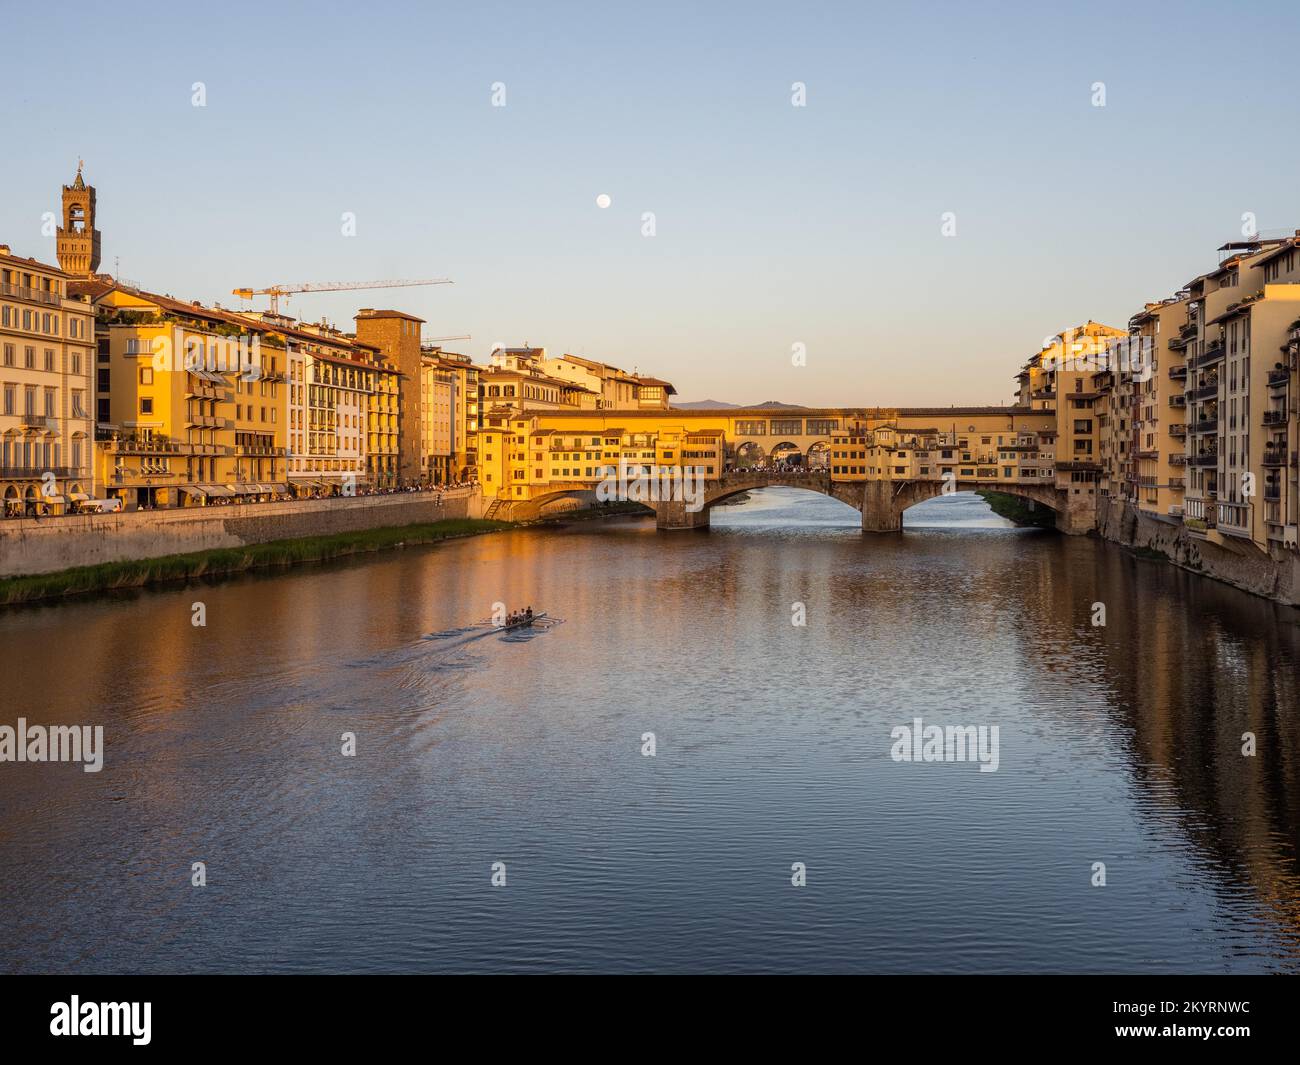 Evening atmosphere and full moon, Ponte Vecchio bridge over the river Arno, Florence, Italy, Europe Stock Photo